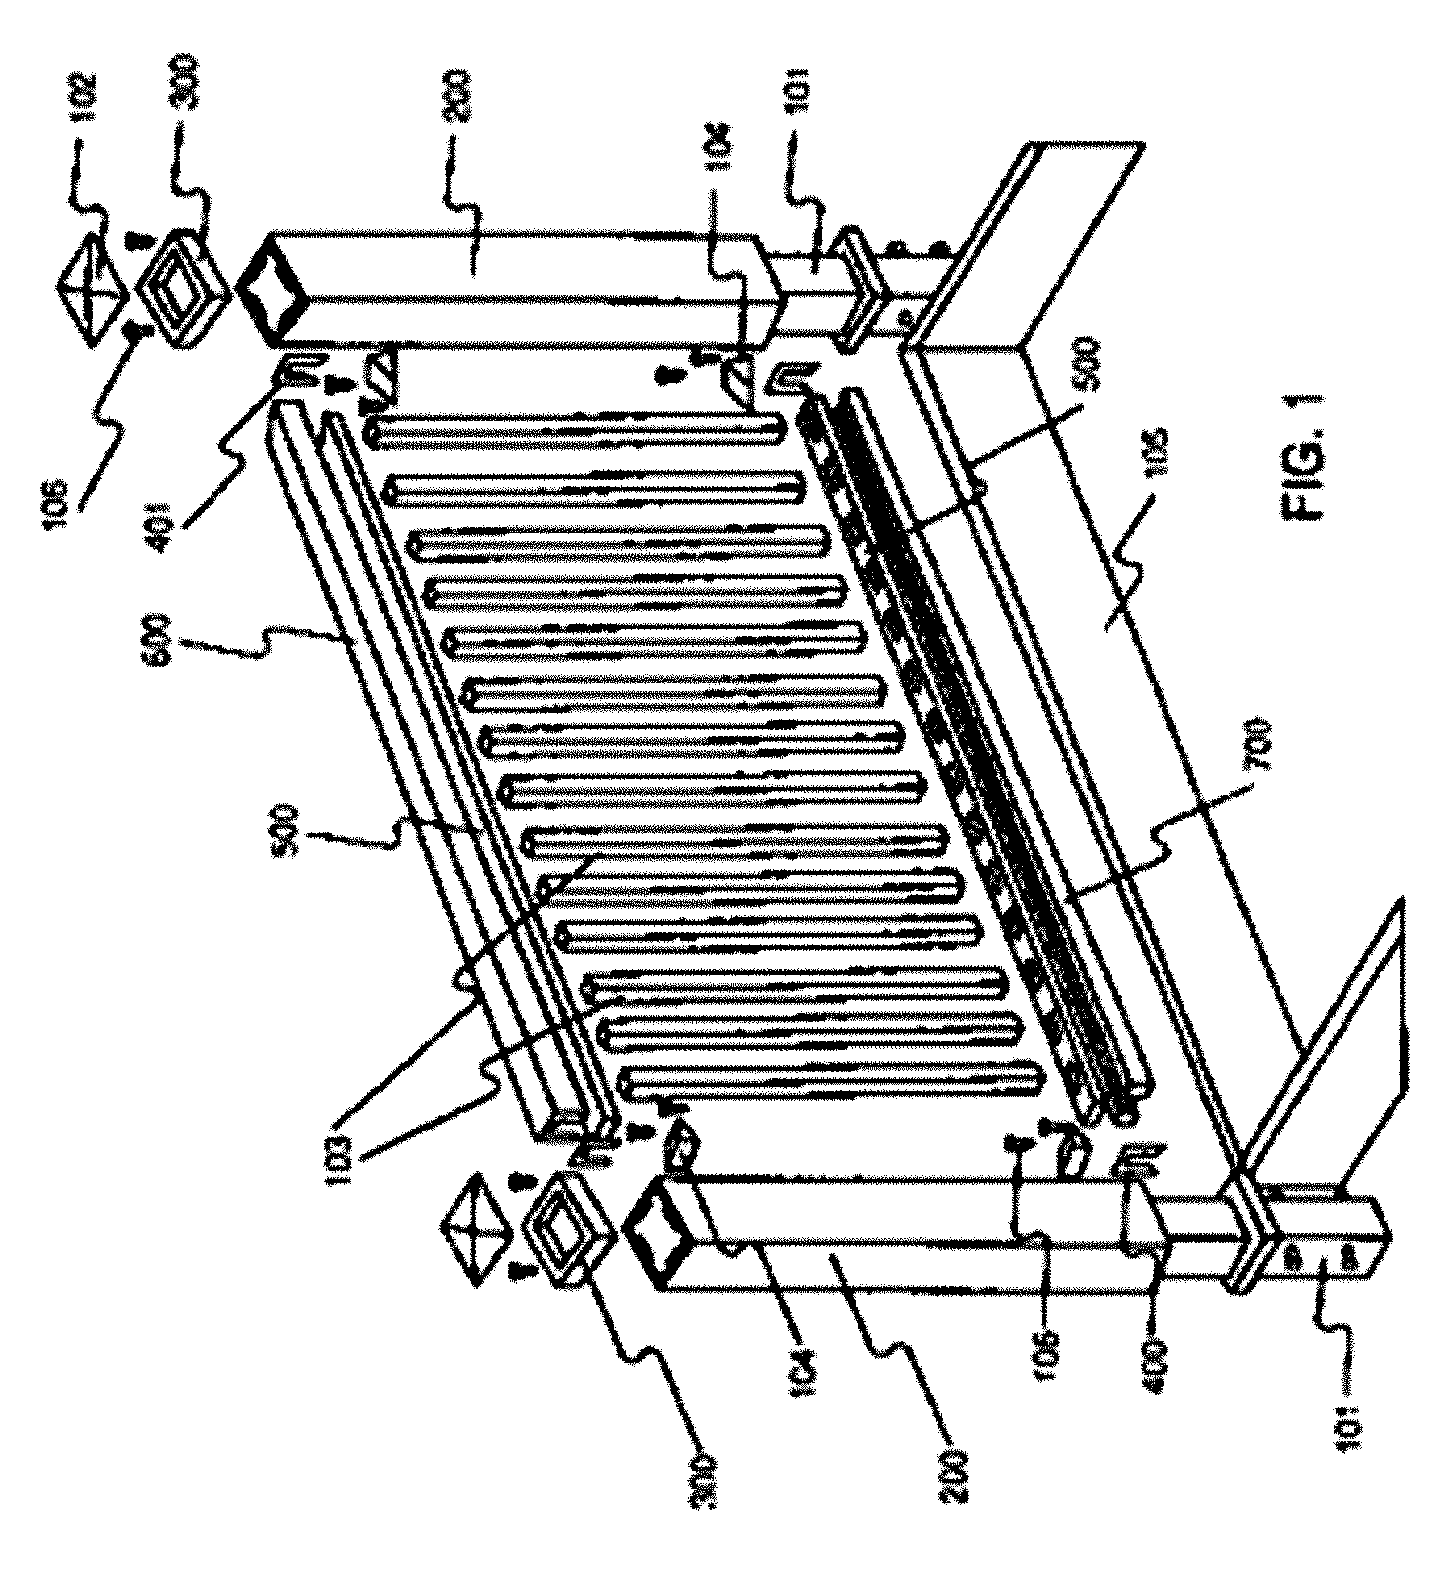 Railing assemblies and related methods and apparatuses